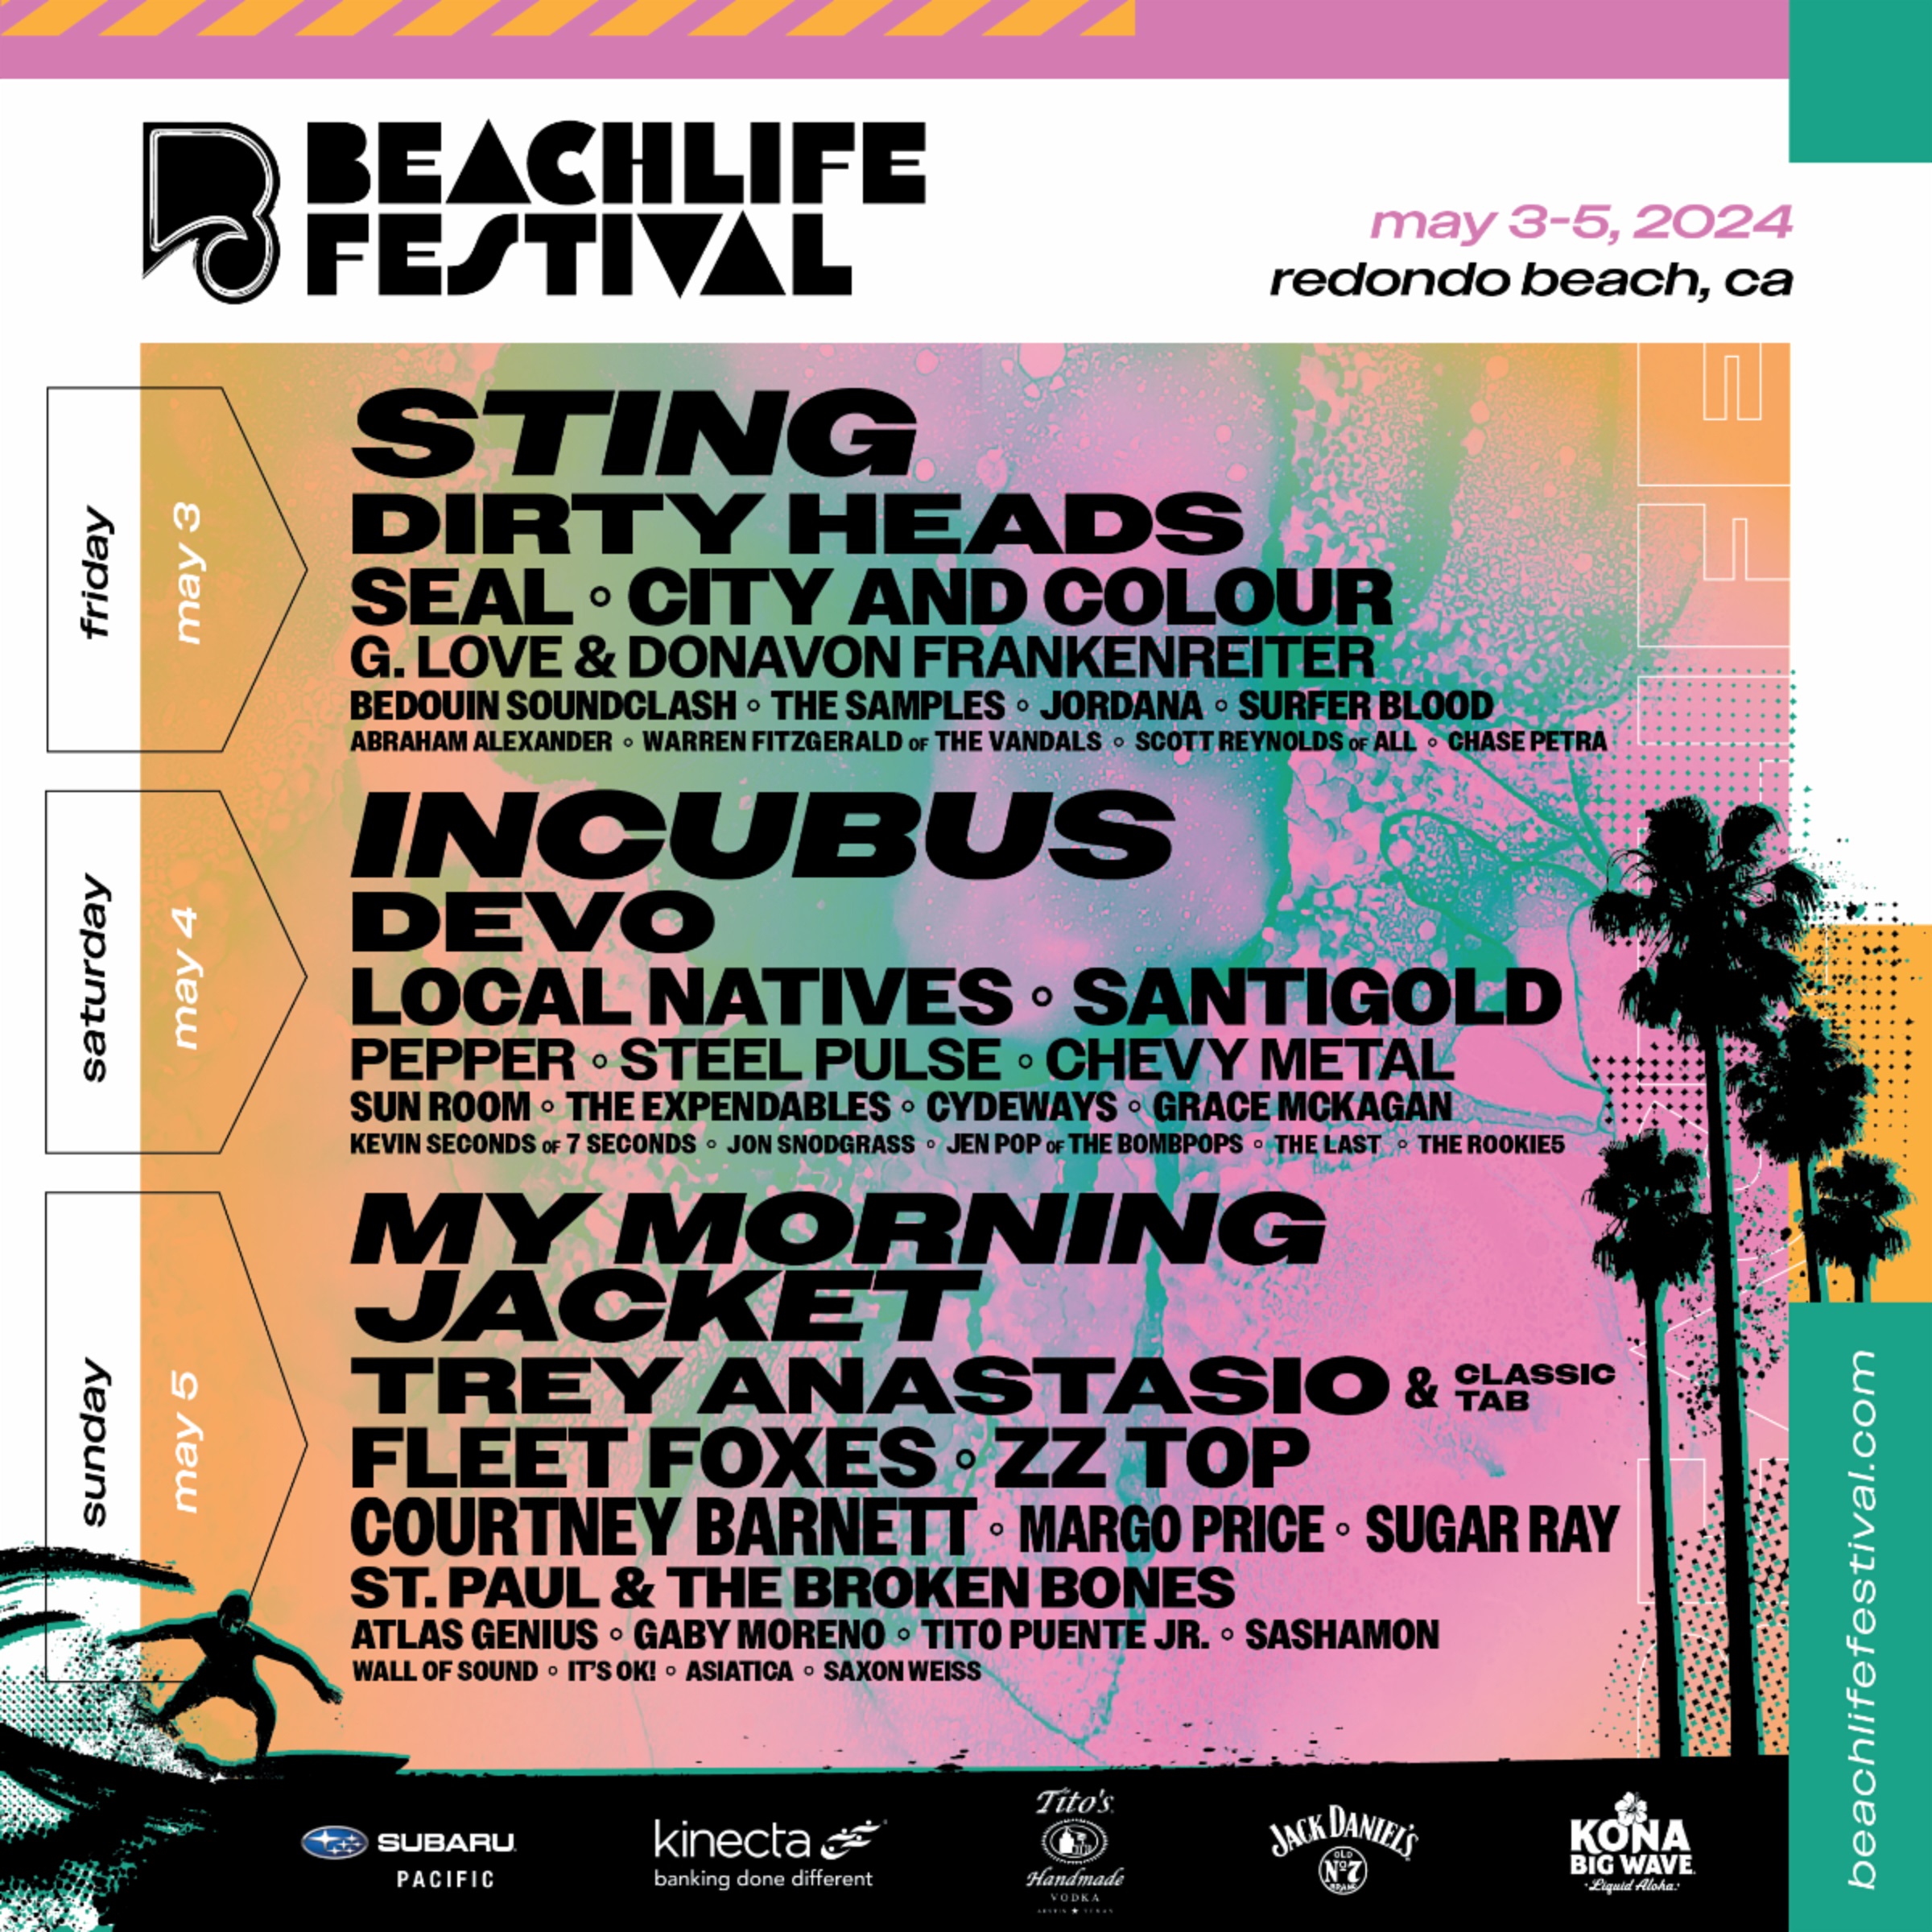 Southern California's BeachLife Festival May 3-5, 2024 Announces Lineup with Sting, Incubus, My Morning Jacket, DEVO, Dirty Heads and More